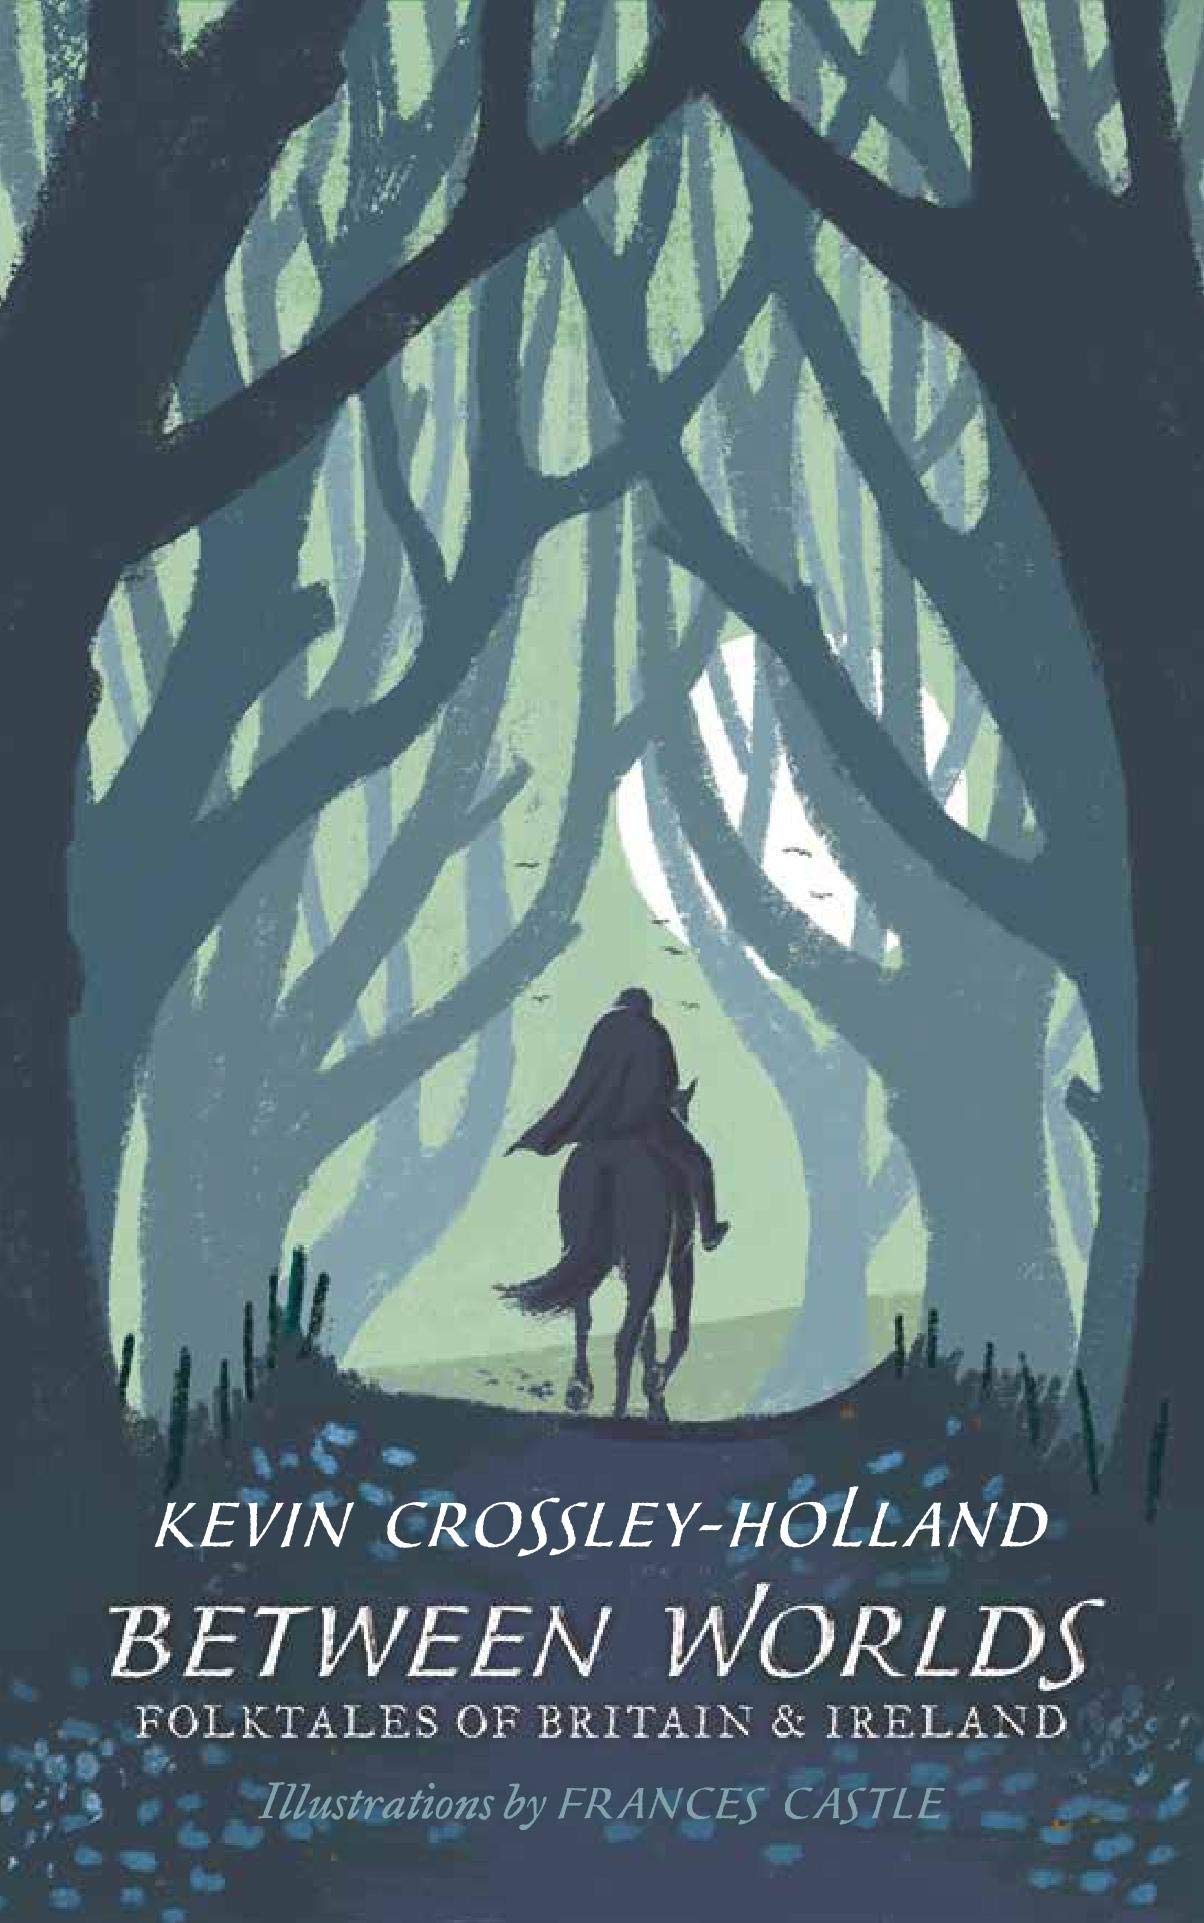 Kevin Crossley-Holland: Between Worlds, Folktales of Britain and Ireland